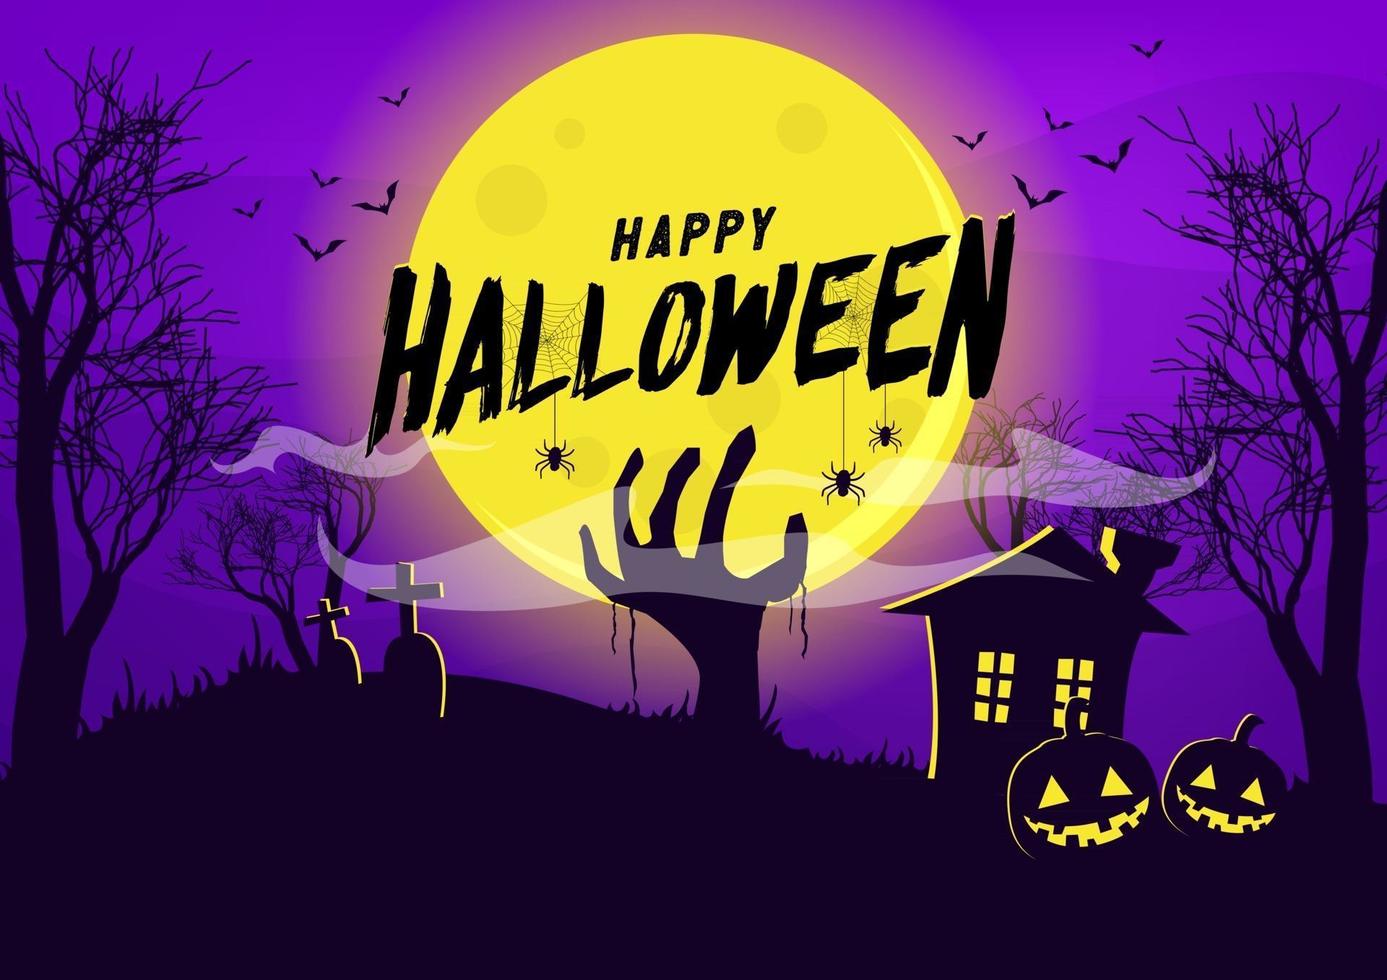 Zombie hand rising out from the ground in full moon night. Happy Halloween concept. vector